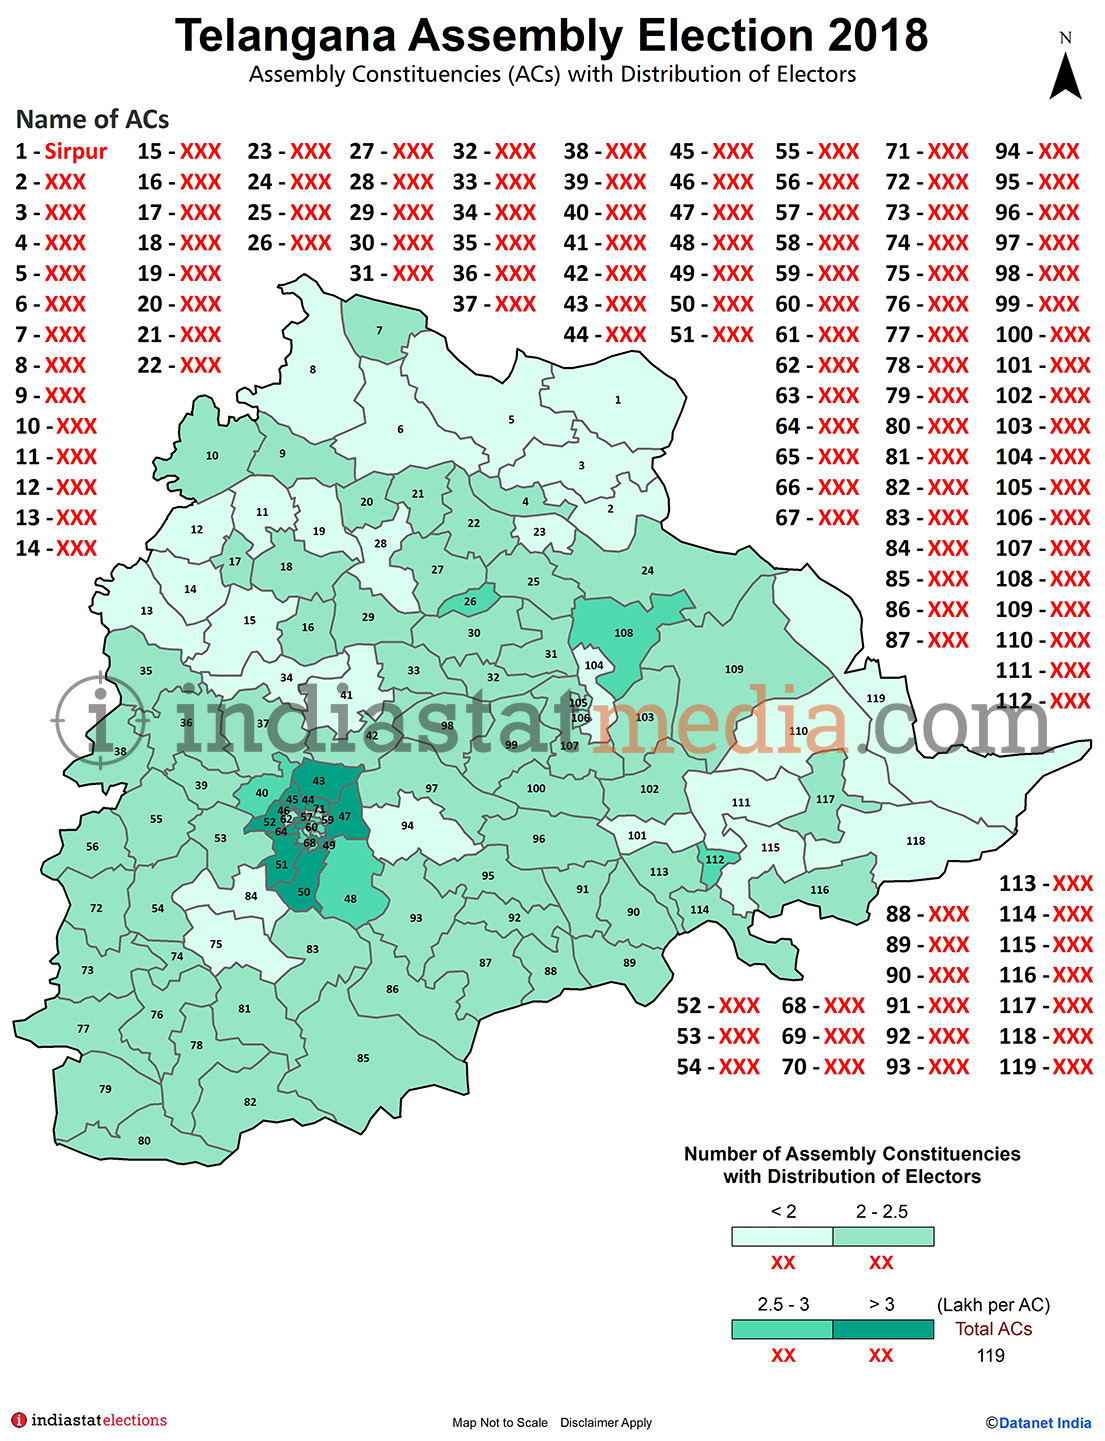 Assembly Constituencies (ACs) with Distribution of Electors in Telangana (Assembly Election - 2018)